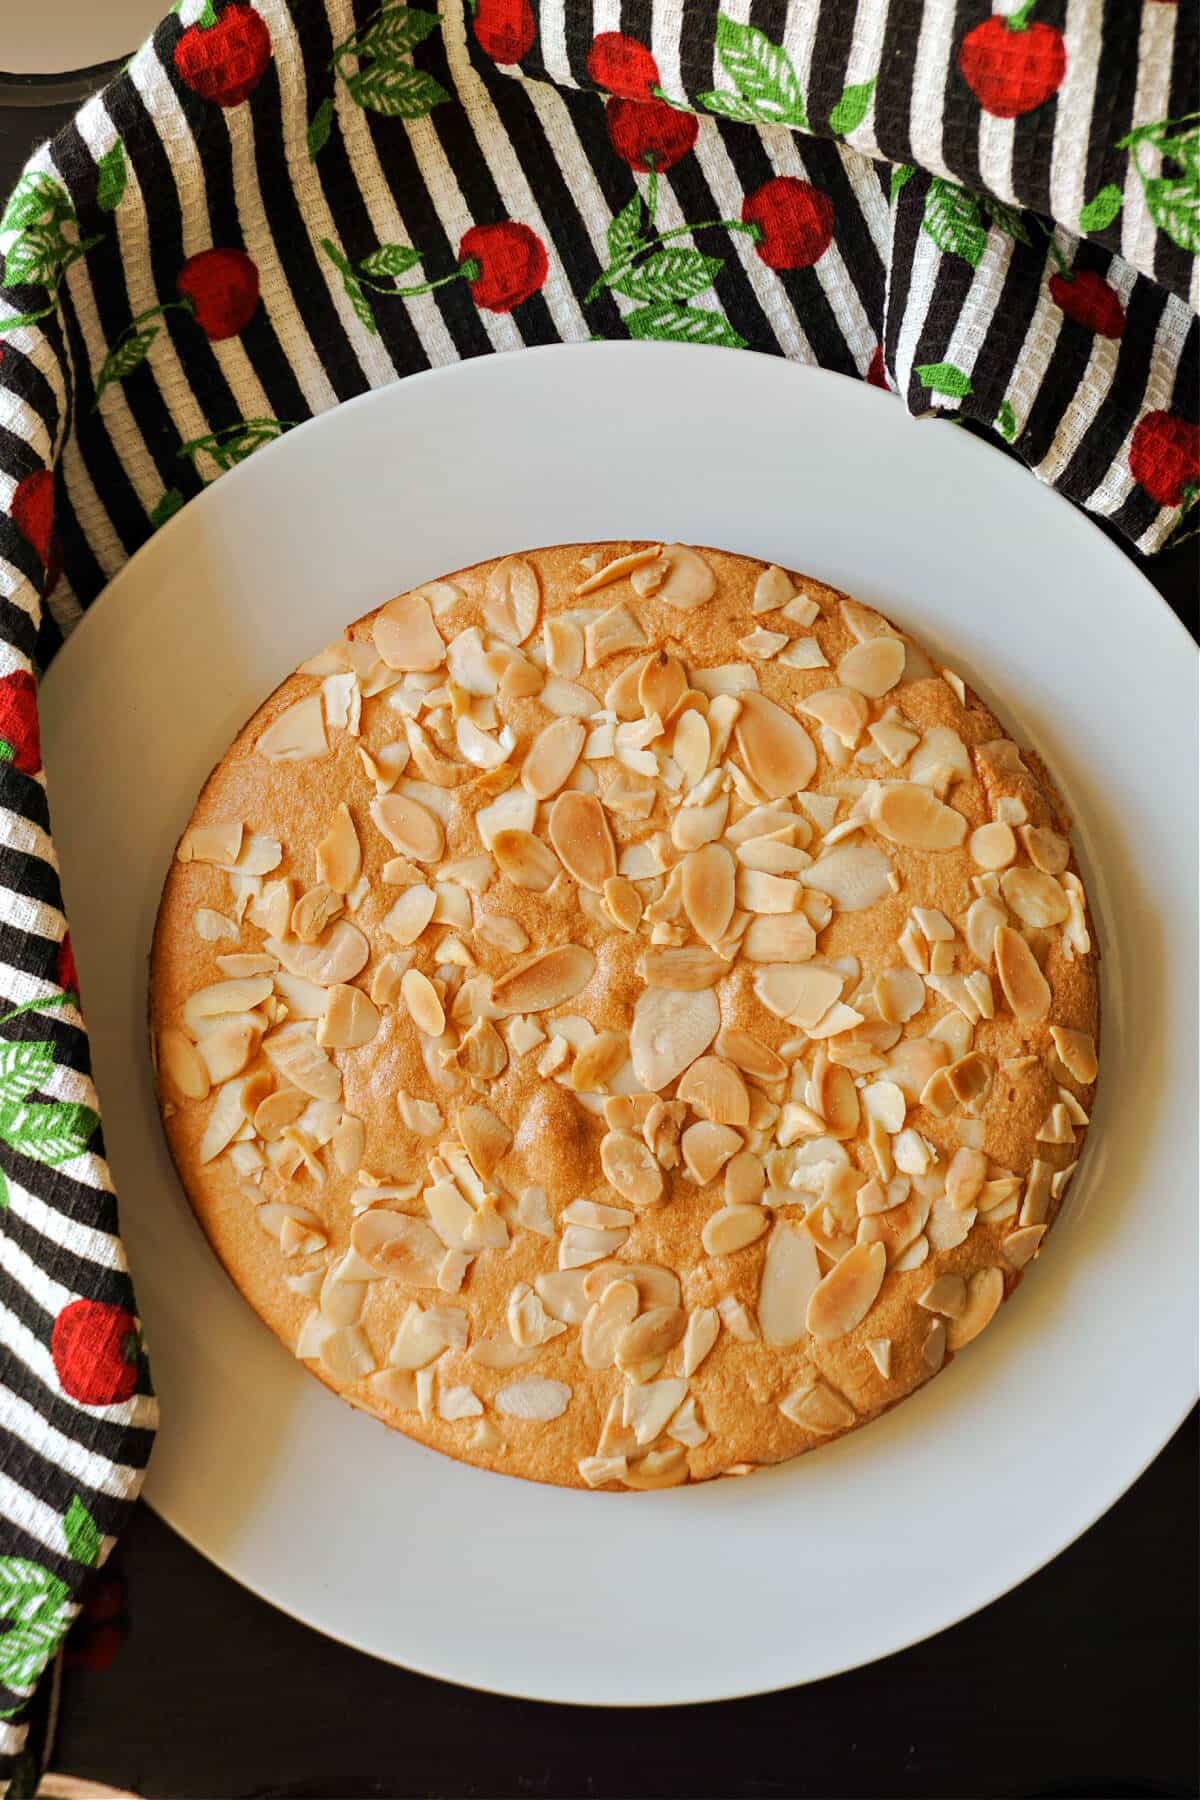 An almond cake on a white plate.